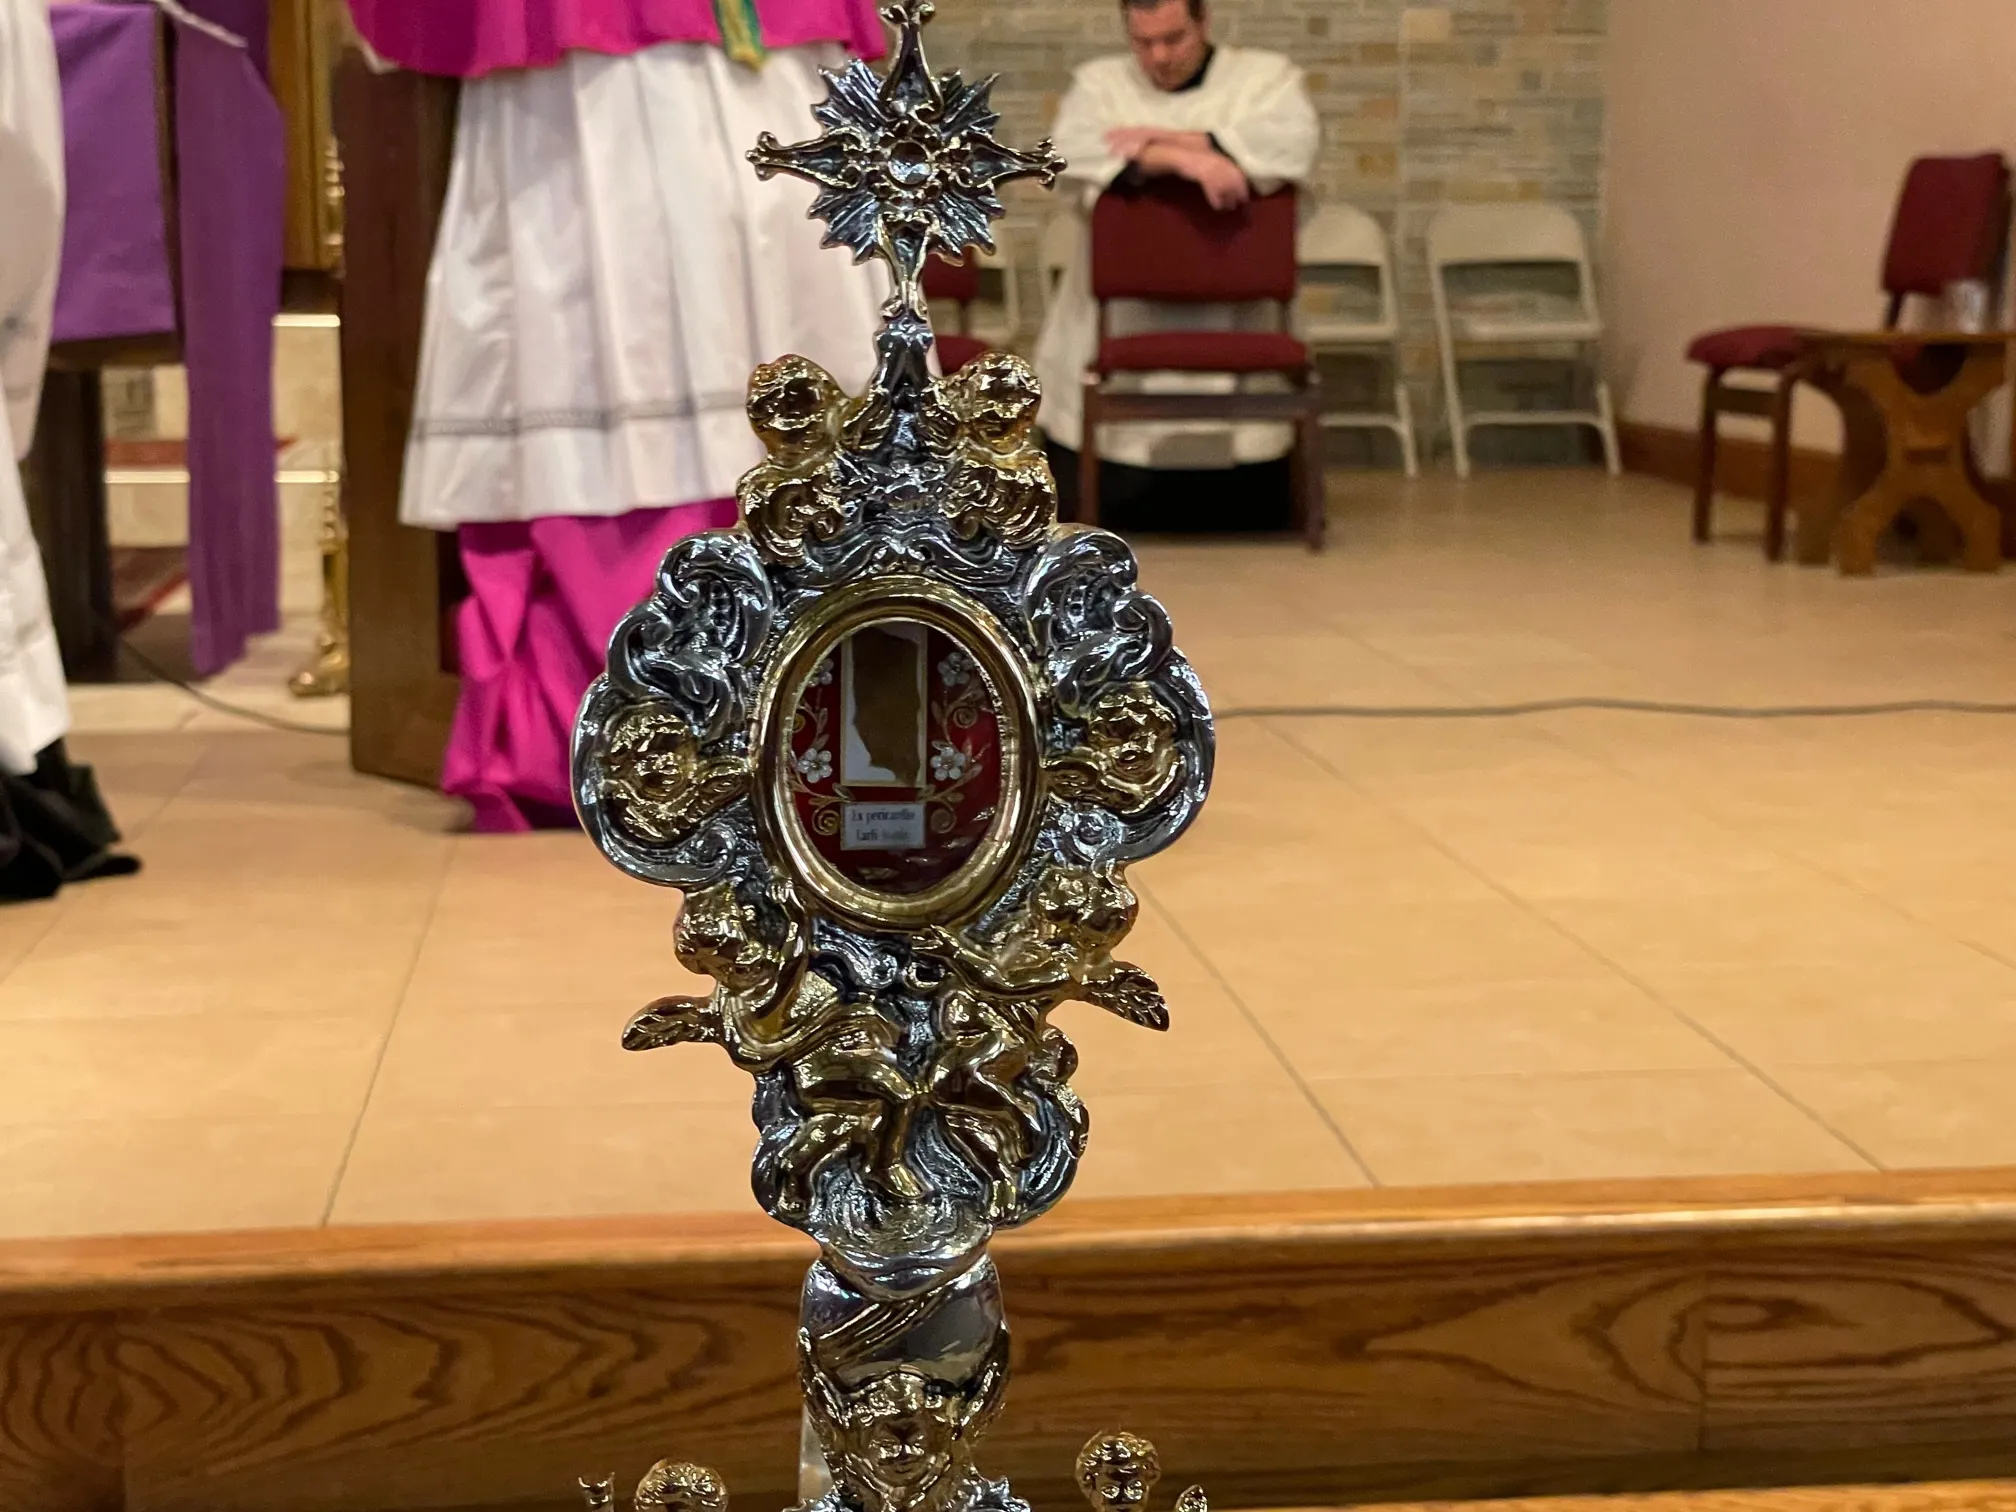 The relic of Bl. Carlo Acutis, a fragment of his pericardium, that is visiting the U.S., at Holy Family parish in Queens, April 6, 2022.?w=200&h=150